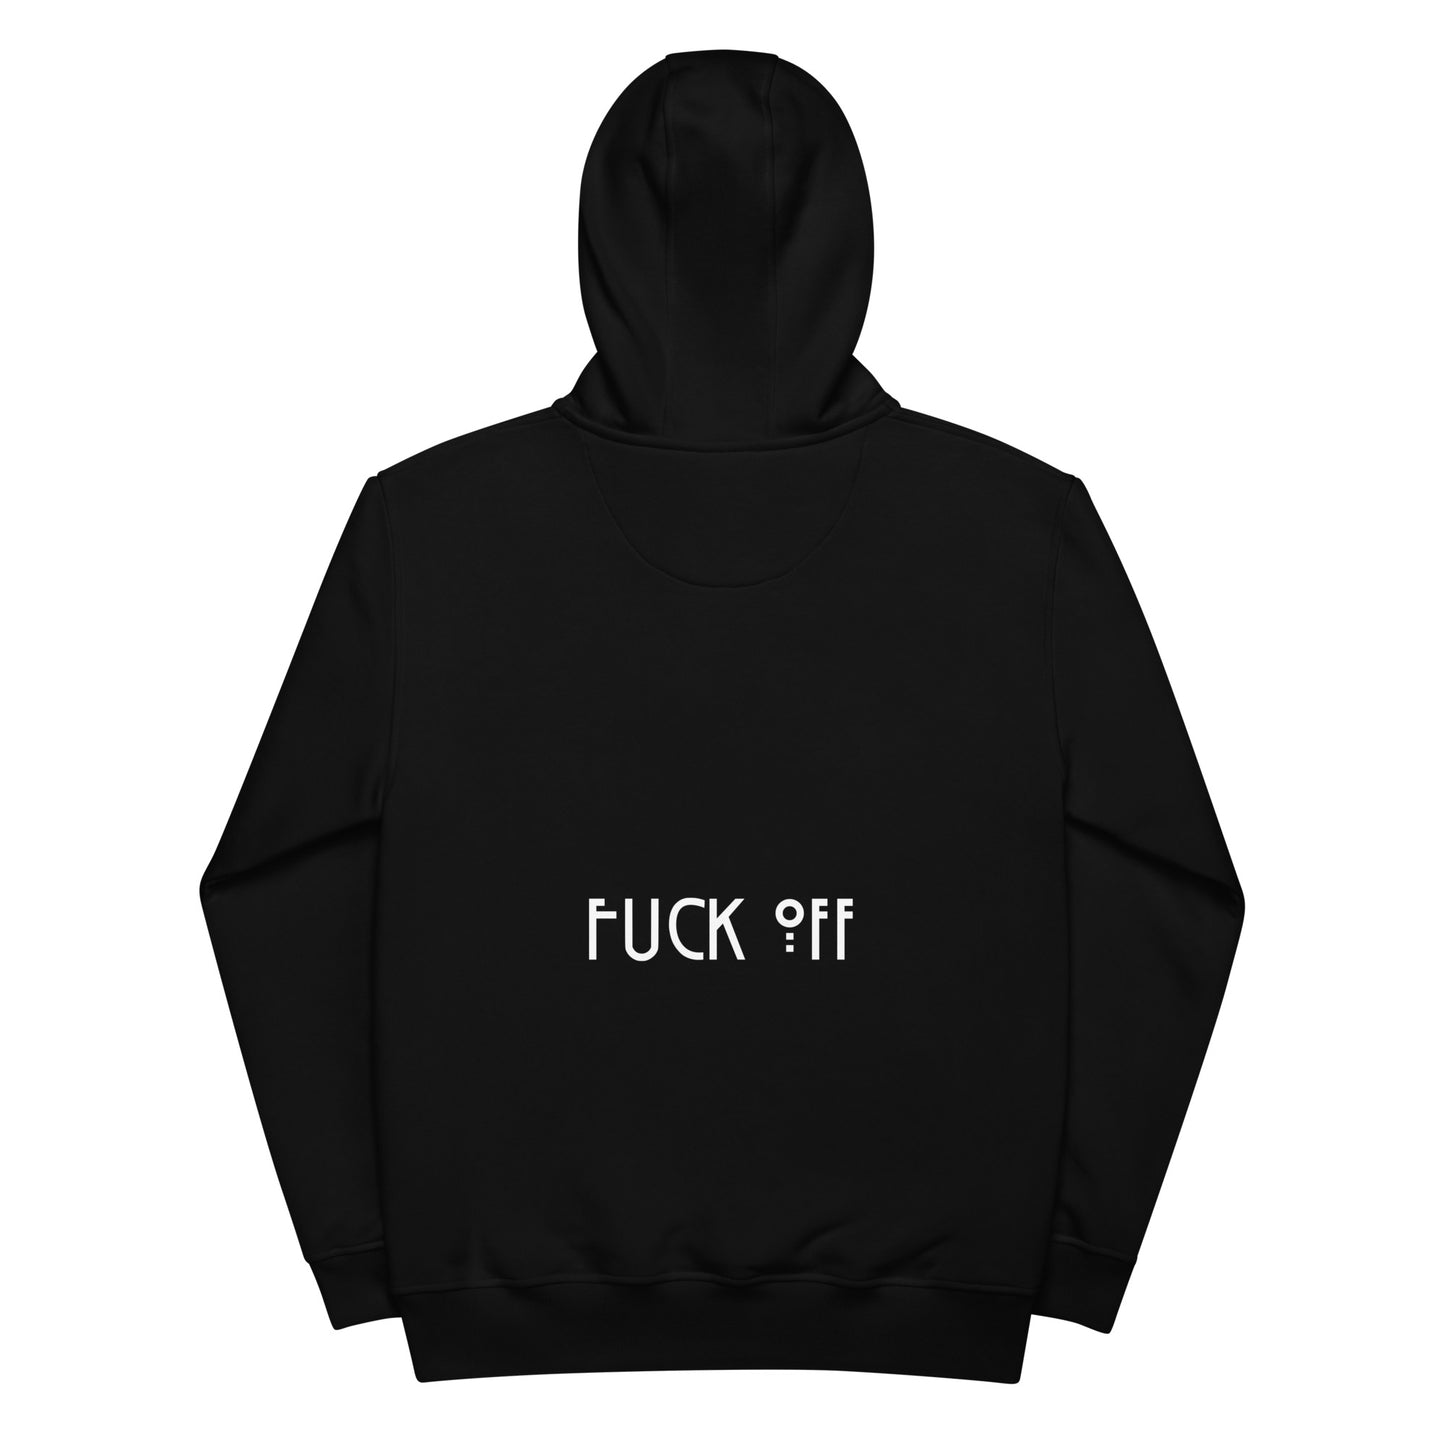 RICH WITCH F*CK OFF HOODIE